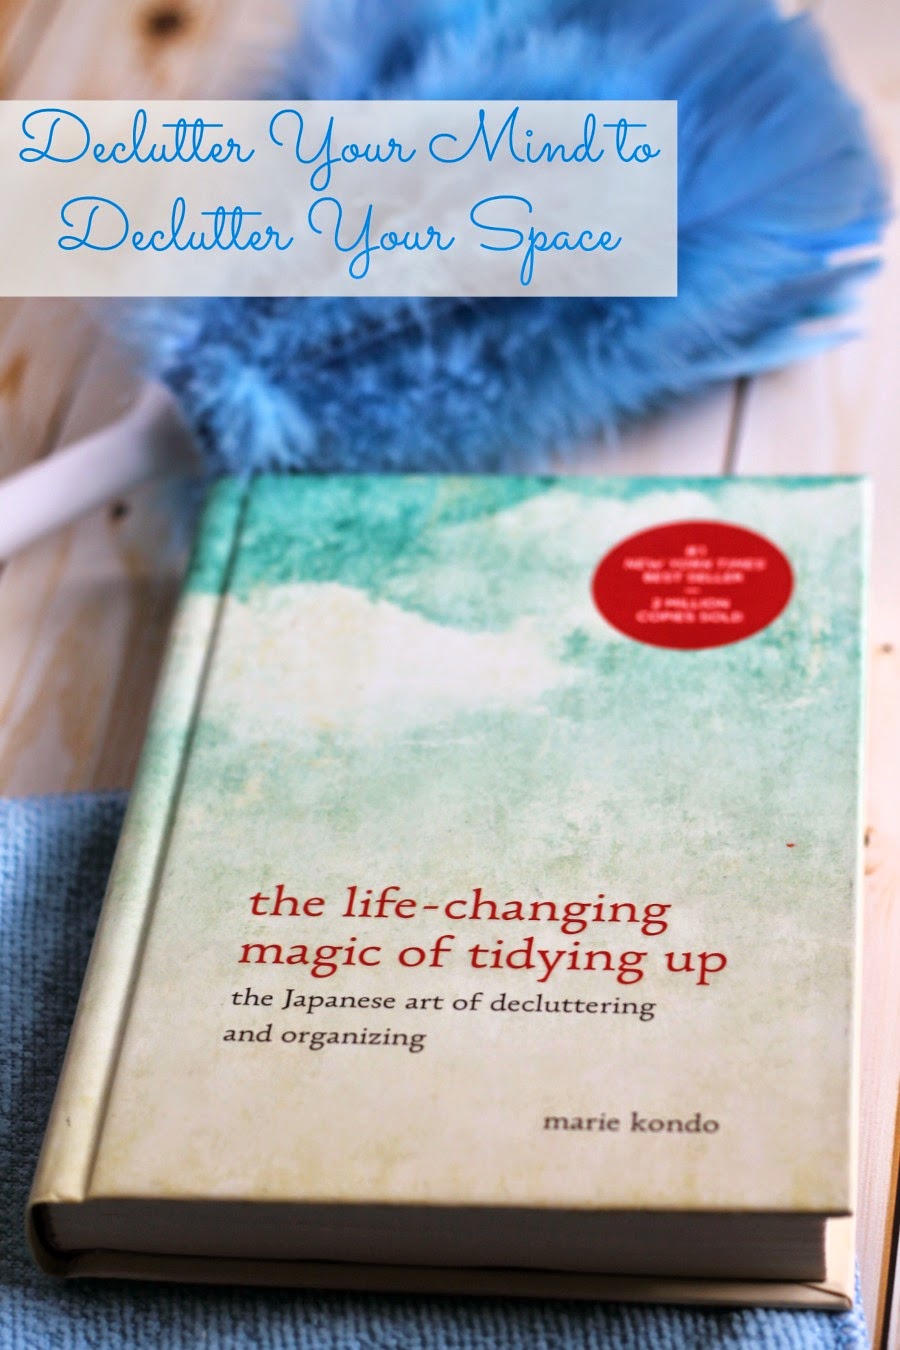 Do you do a major spring cleaning each year just to have it all end up cluttered & disorganized within a few months? Then you just may need to learn how Declutter Your Mind to Declutter Your Space. Get entered to win a copy of The Life-Changing Magic of Tidying Up!